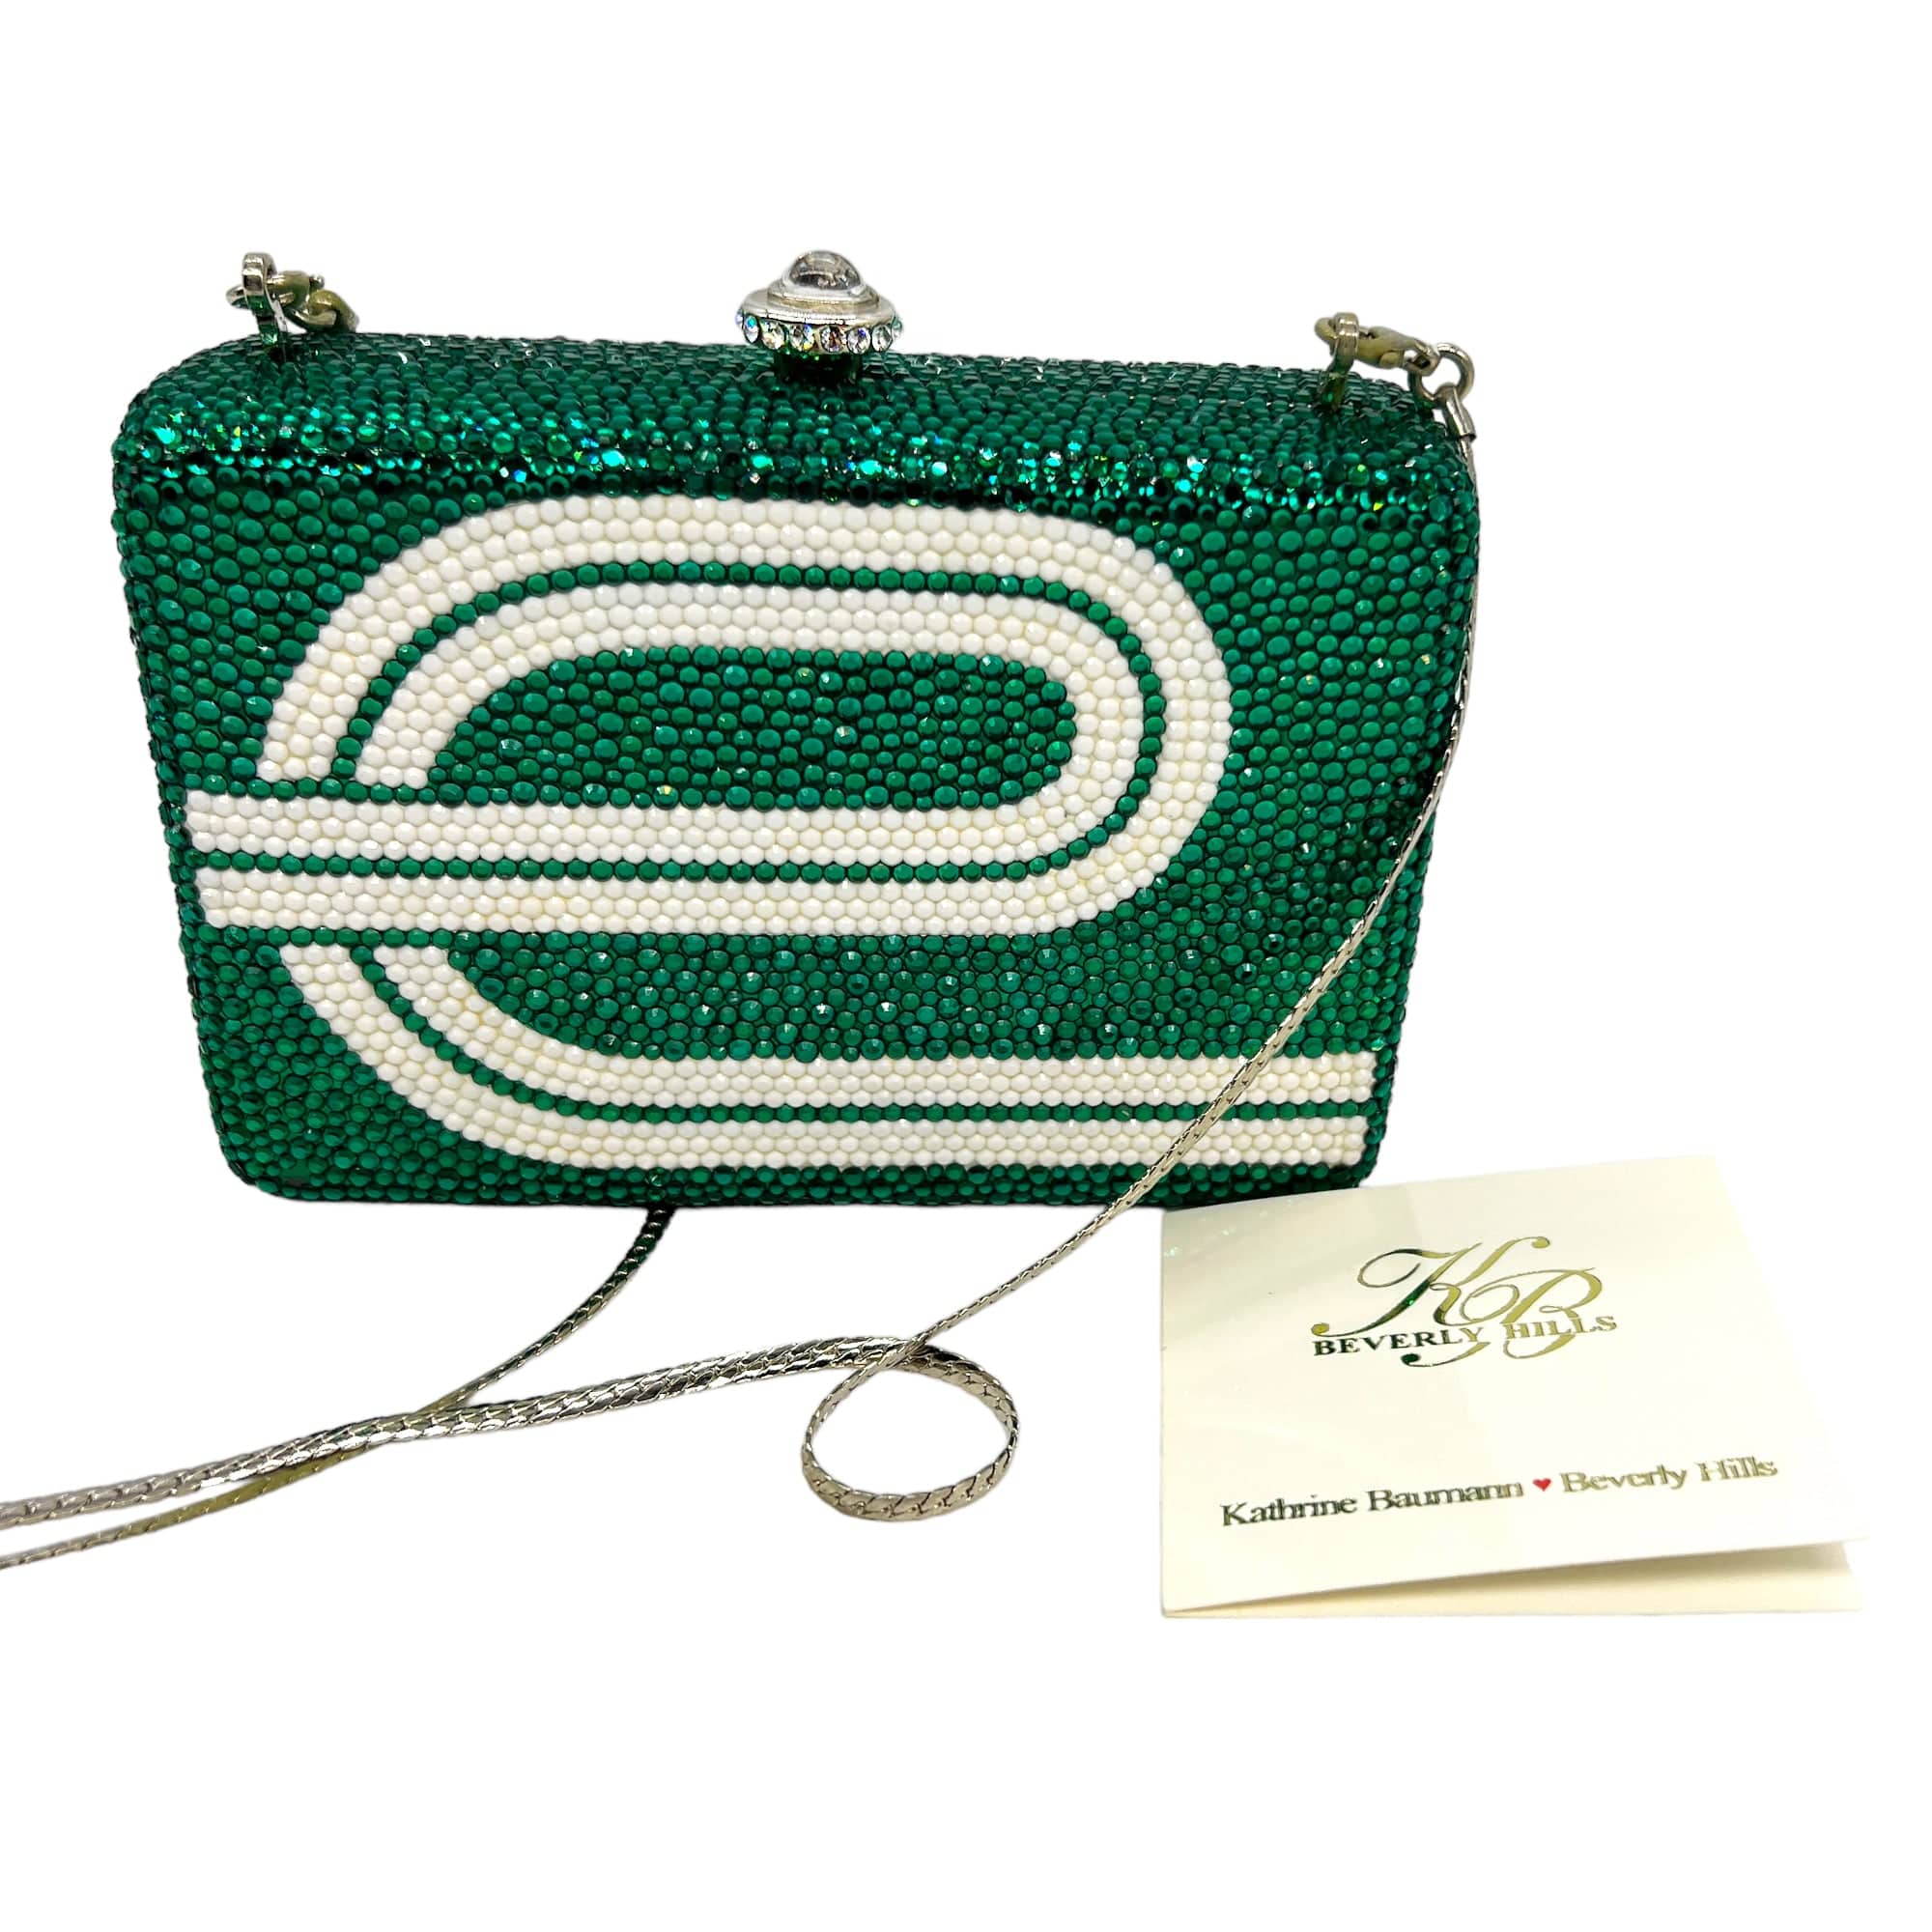 All Crystal Purses | Gifts That Give Back